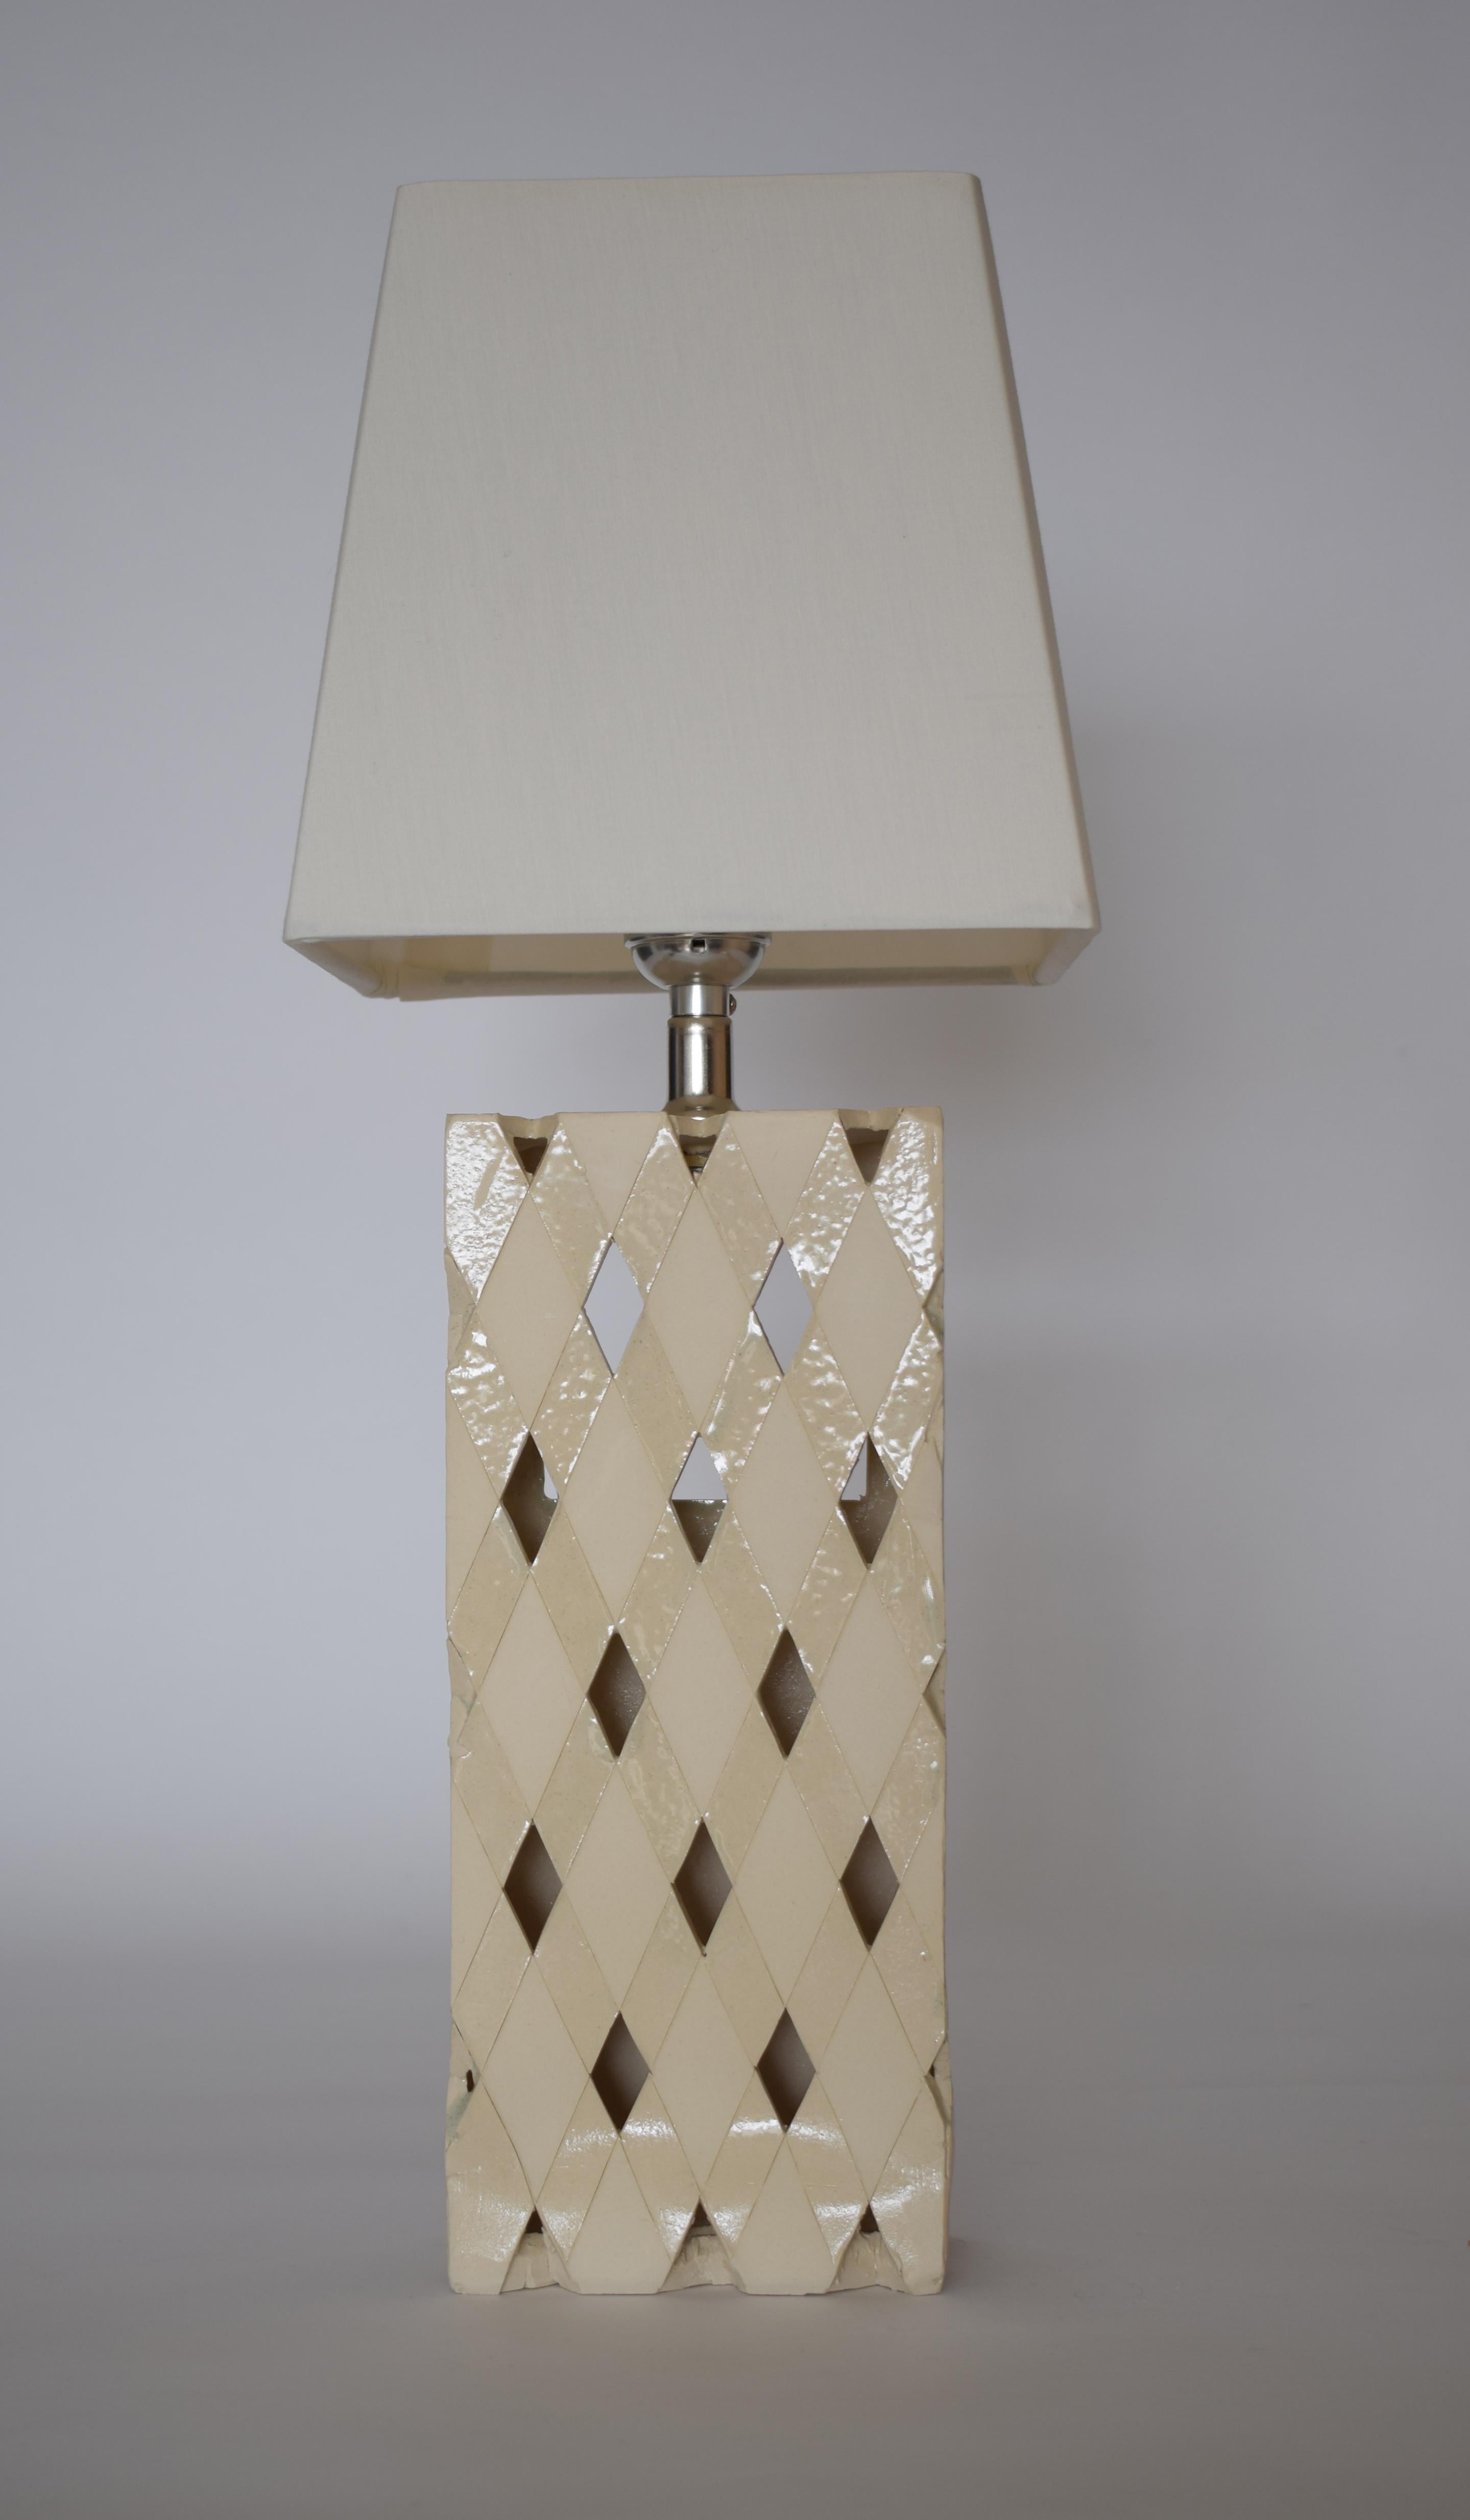 Inspired by the iconic Hearst building in NYC, this lamp is crafted with precision and sophistication; it features a rectangular clay prism incised with an array of diamond openings. Drawing inspiration from Norman Foster's design, the lamp